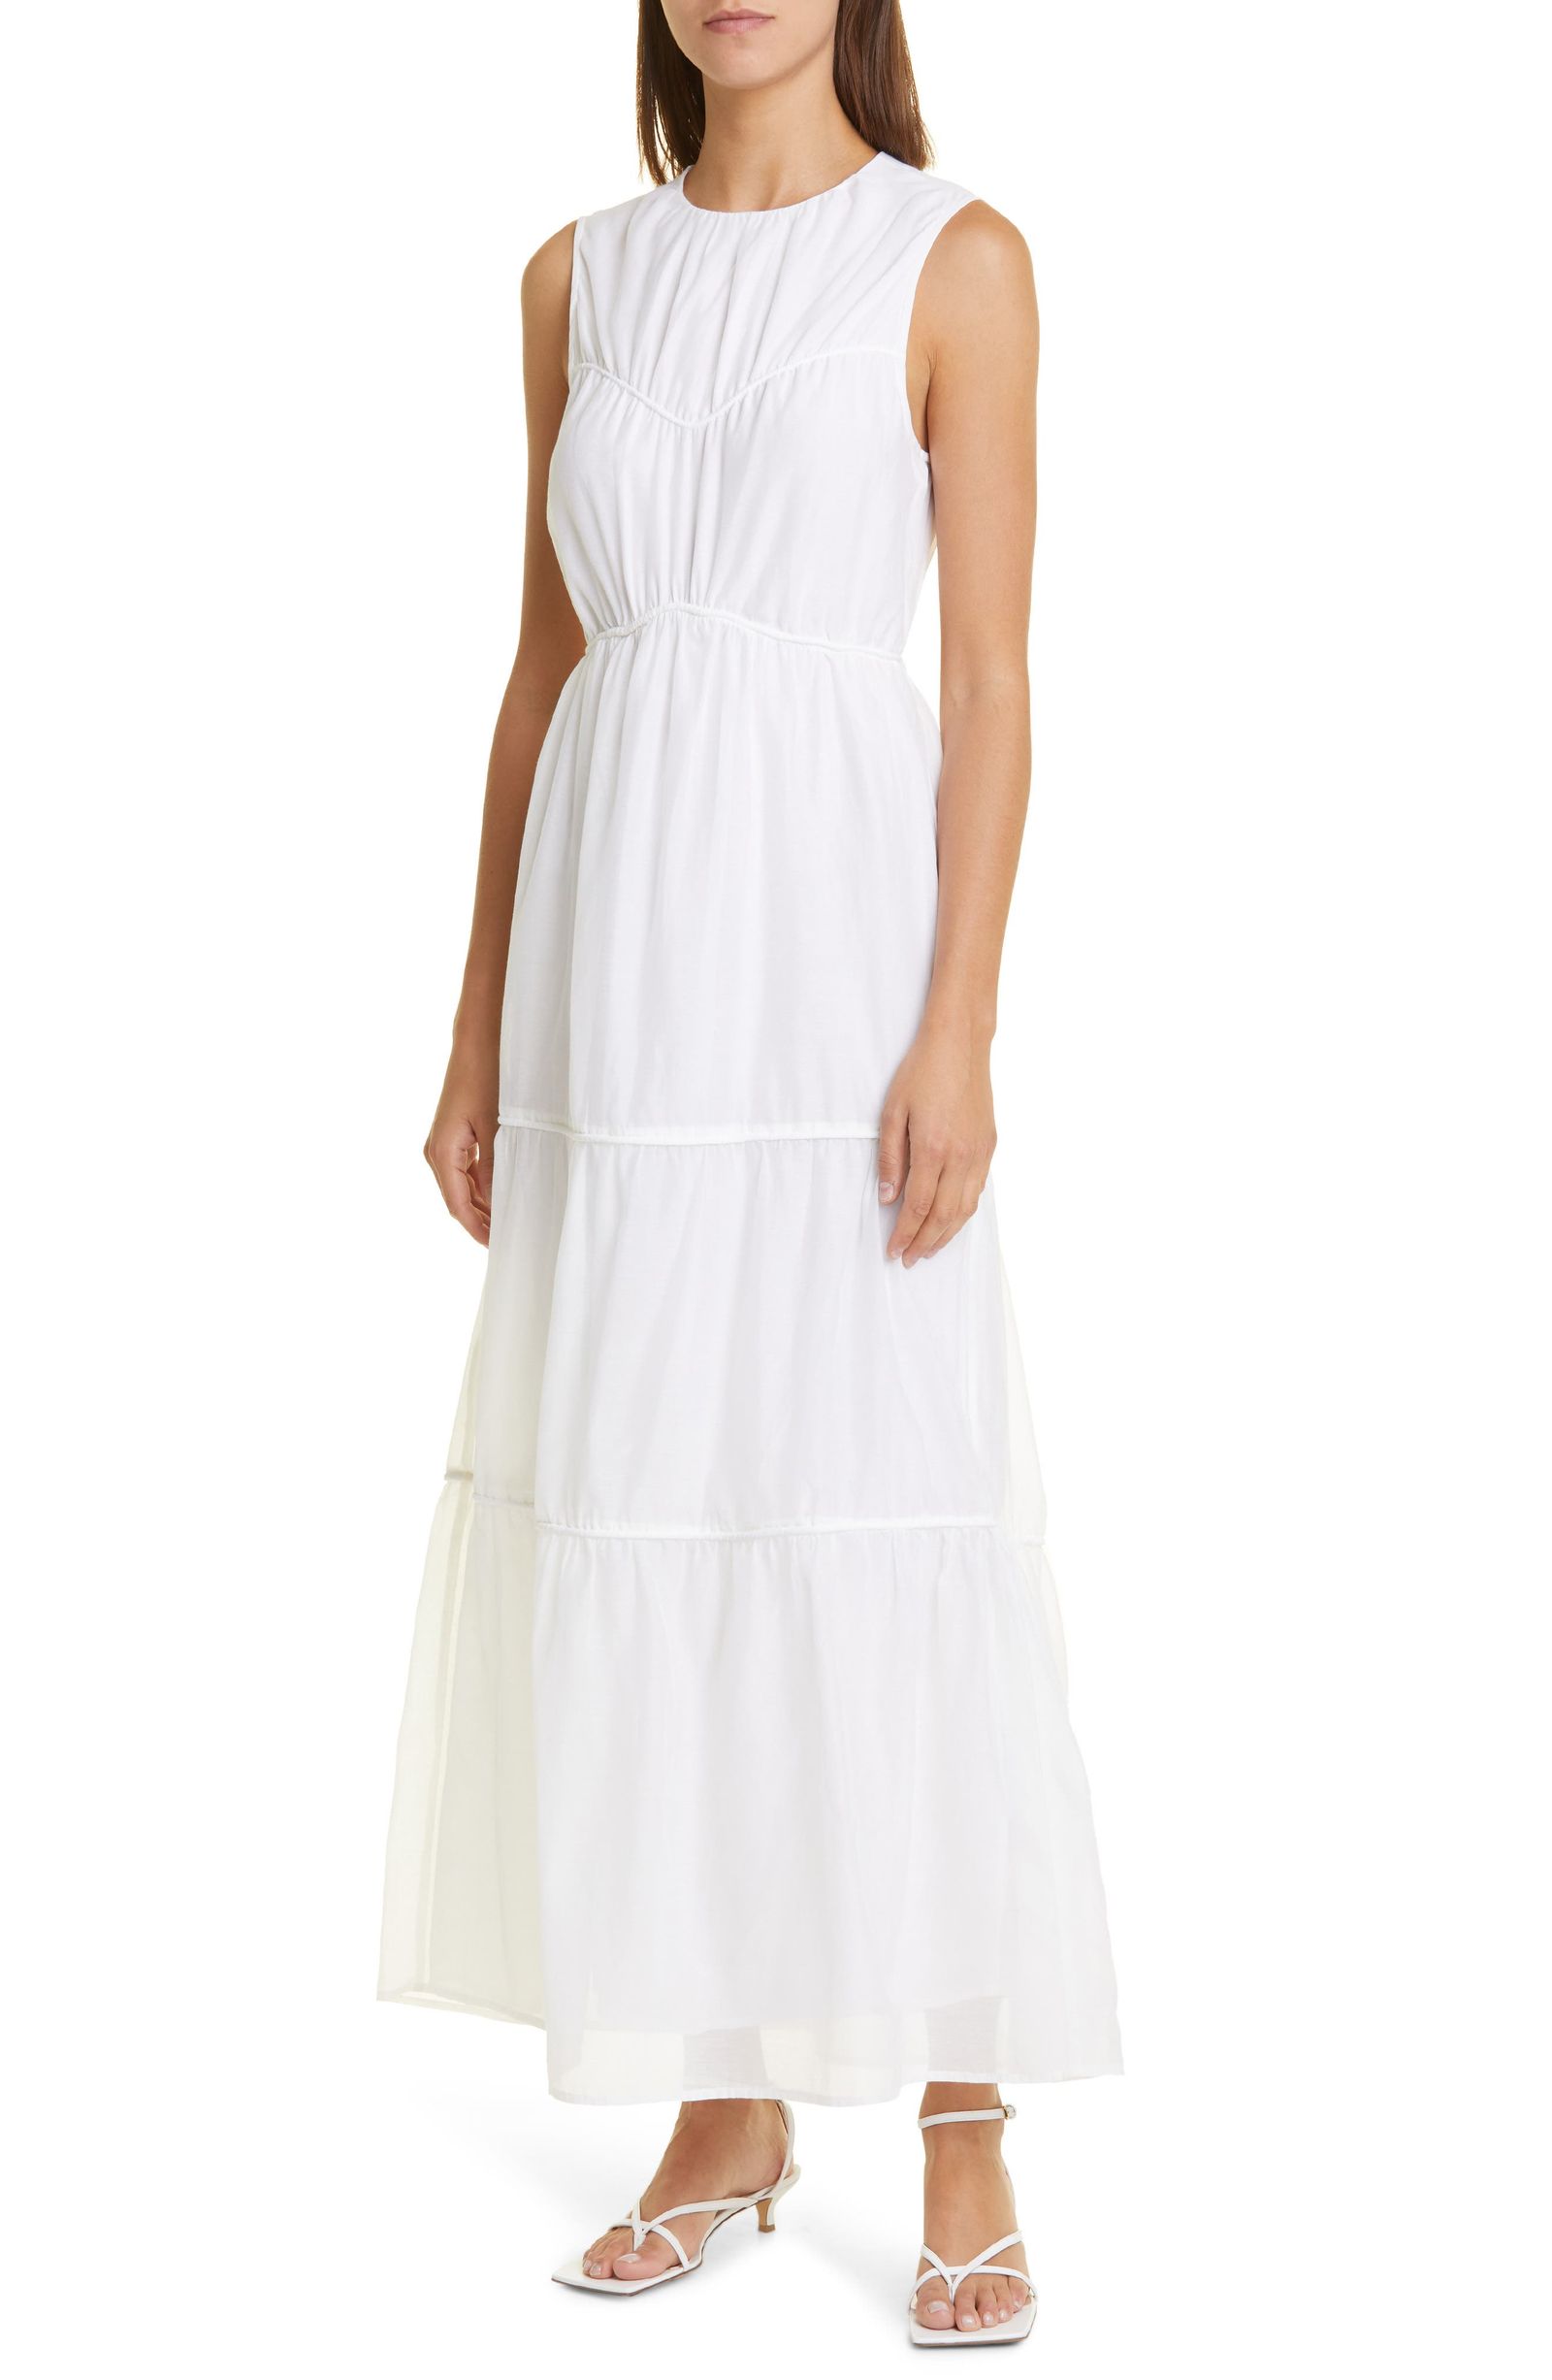 32 White Summer Dresses You'll Never Get Tired Of | Who What Wear